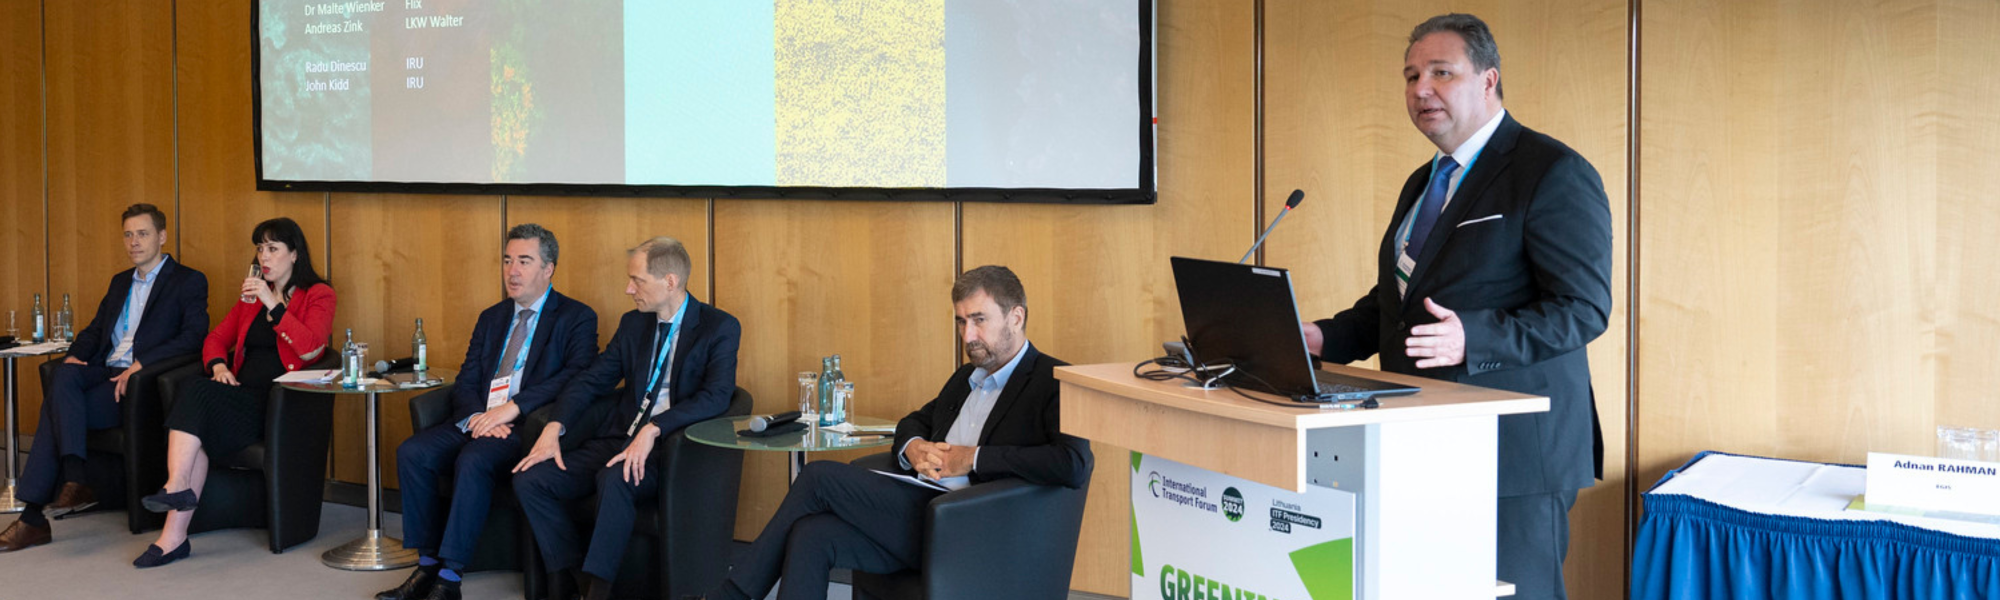 “How can we be greener and more resilient?” was the main question put to industry expert panellists – from Amazon, Flixbus, LKW Walter, Michelin and the World Bank – at IRU’s ITF Summit event today.